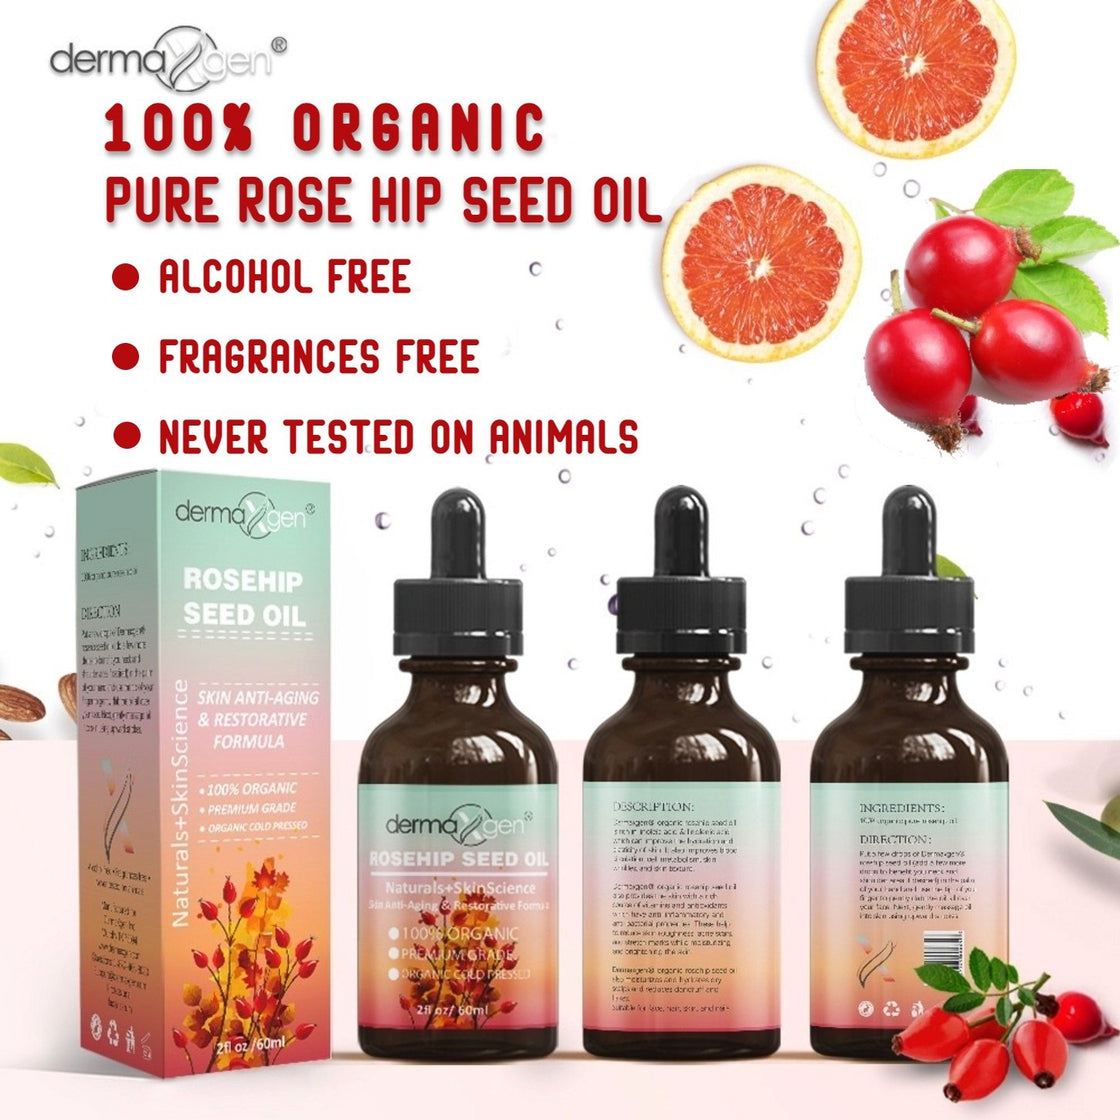 ROSEHIP SEED OIL 8 fl oz -100% Organic & Cold Pressed - Anti-Aging Moisturizing Treatment for Face, Hair, Skin & Nails, Acne Scars, Anti-Wrinkle